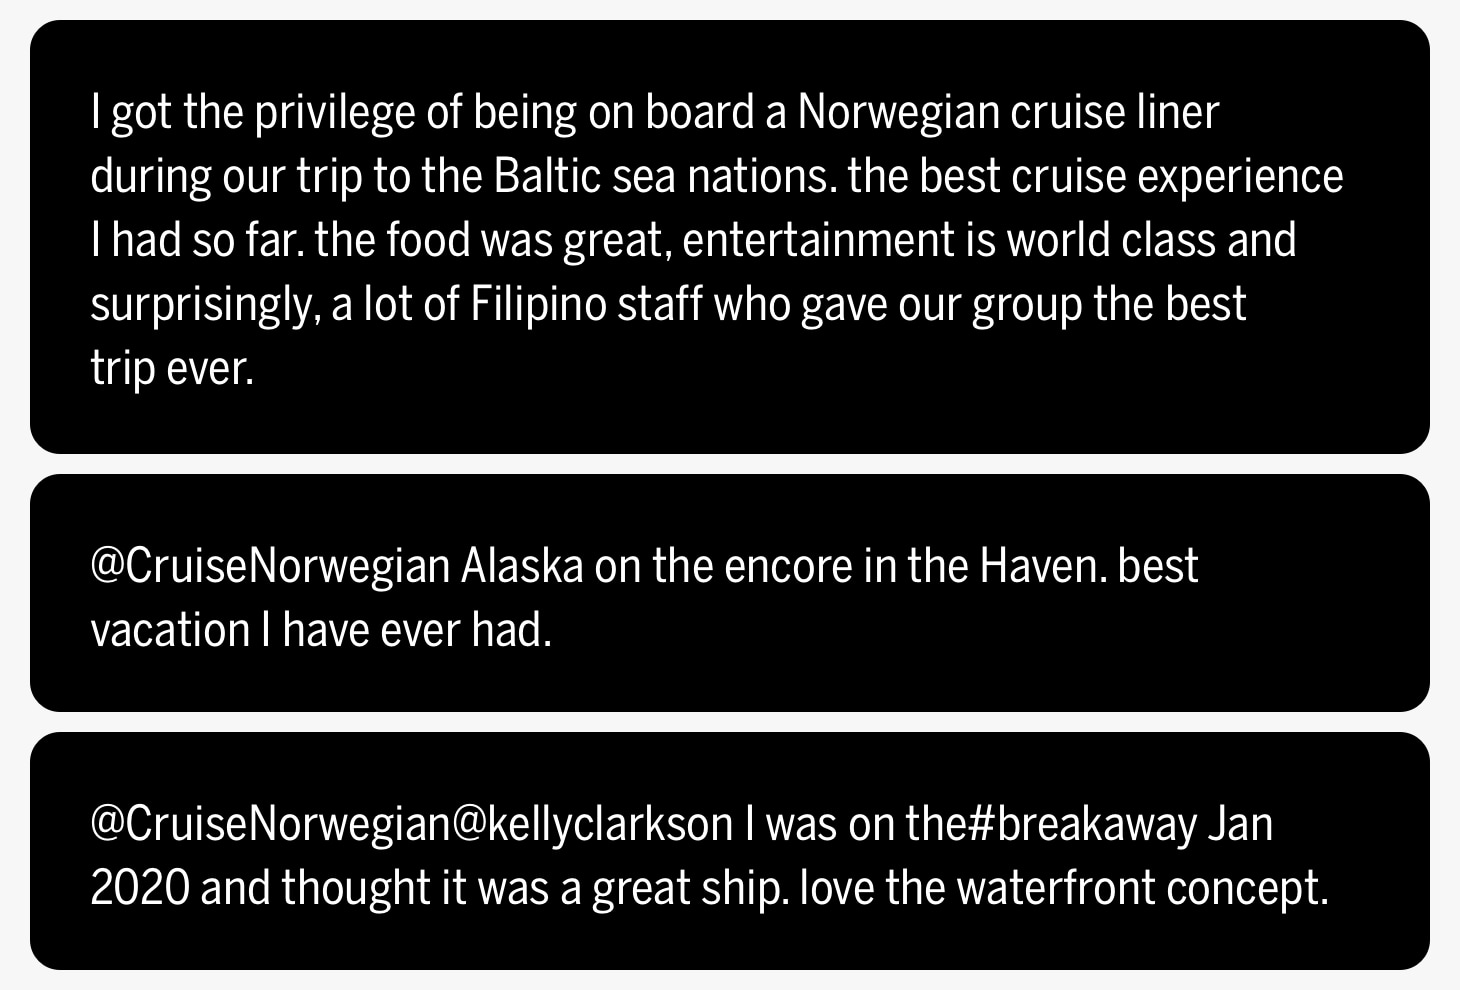 A group of people are talking about their experience on a cruise.